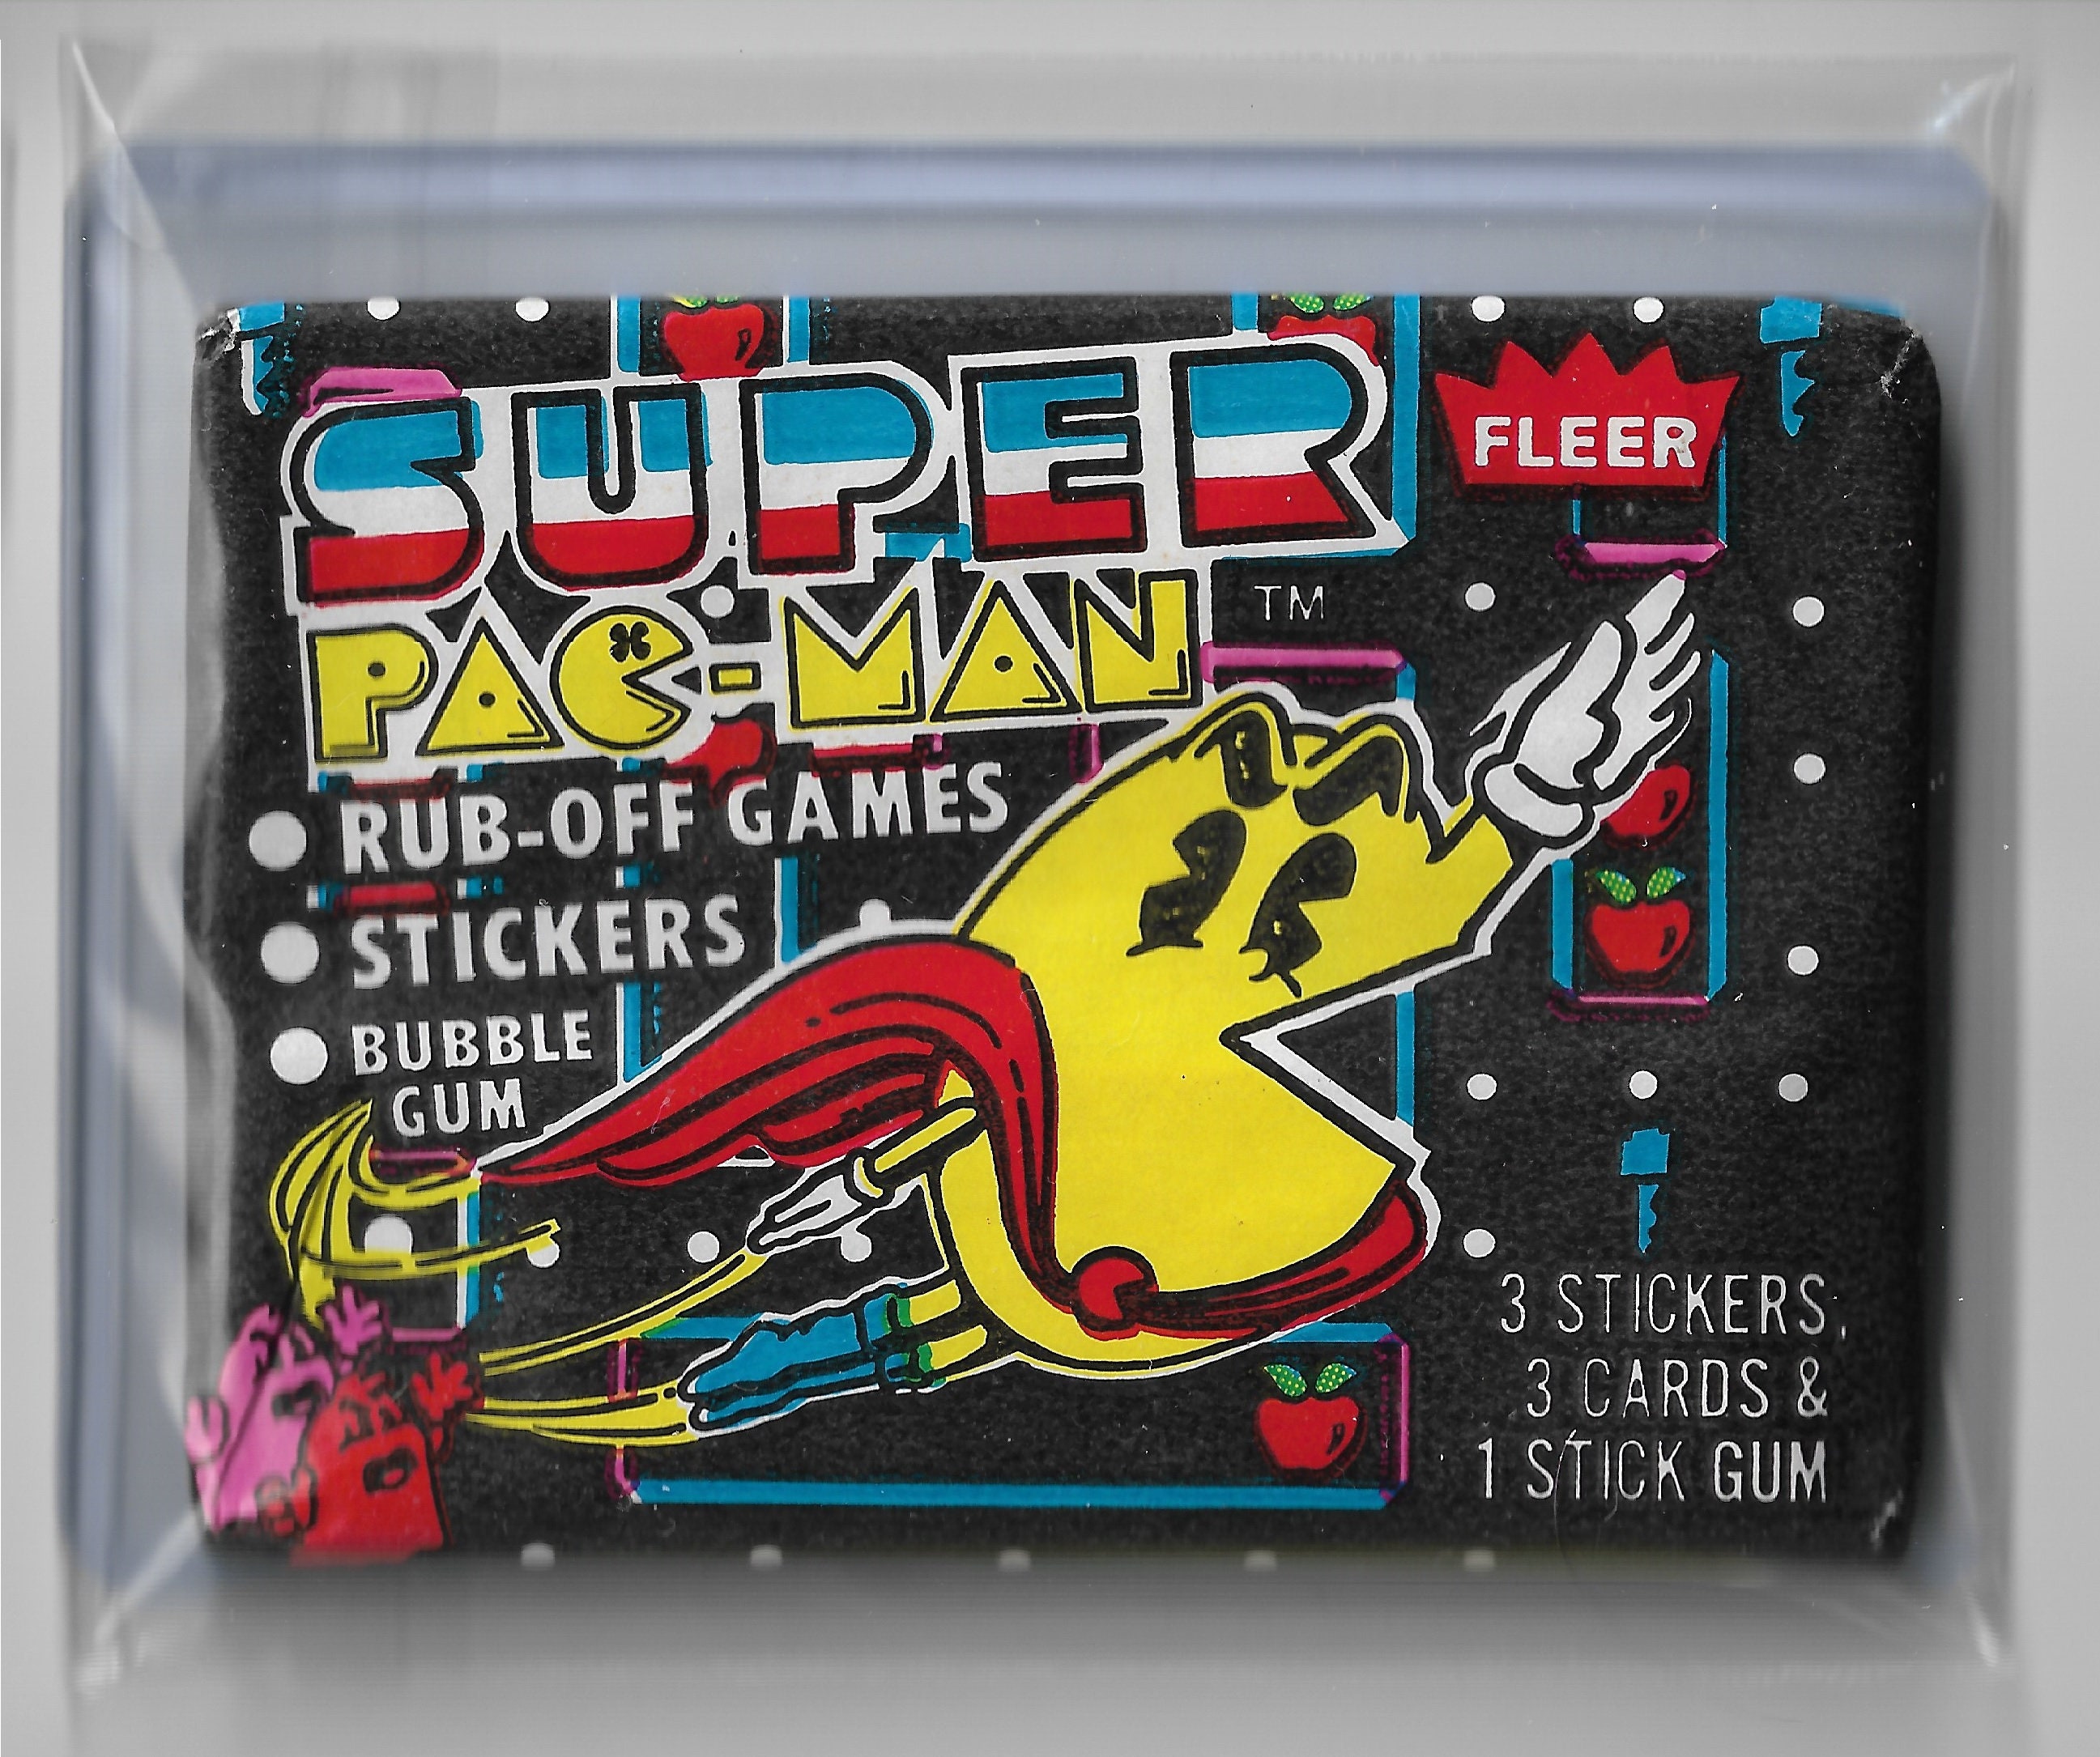 1981 Ms PAC-MAN I COMPLETED ACT IV #46 of54 STICKER RUB OFF CARD WAX PACK FLEER 